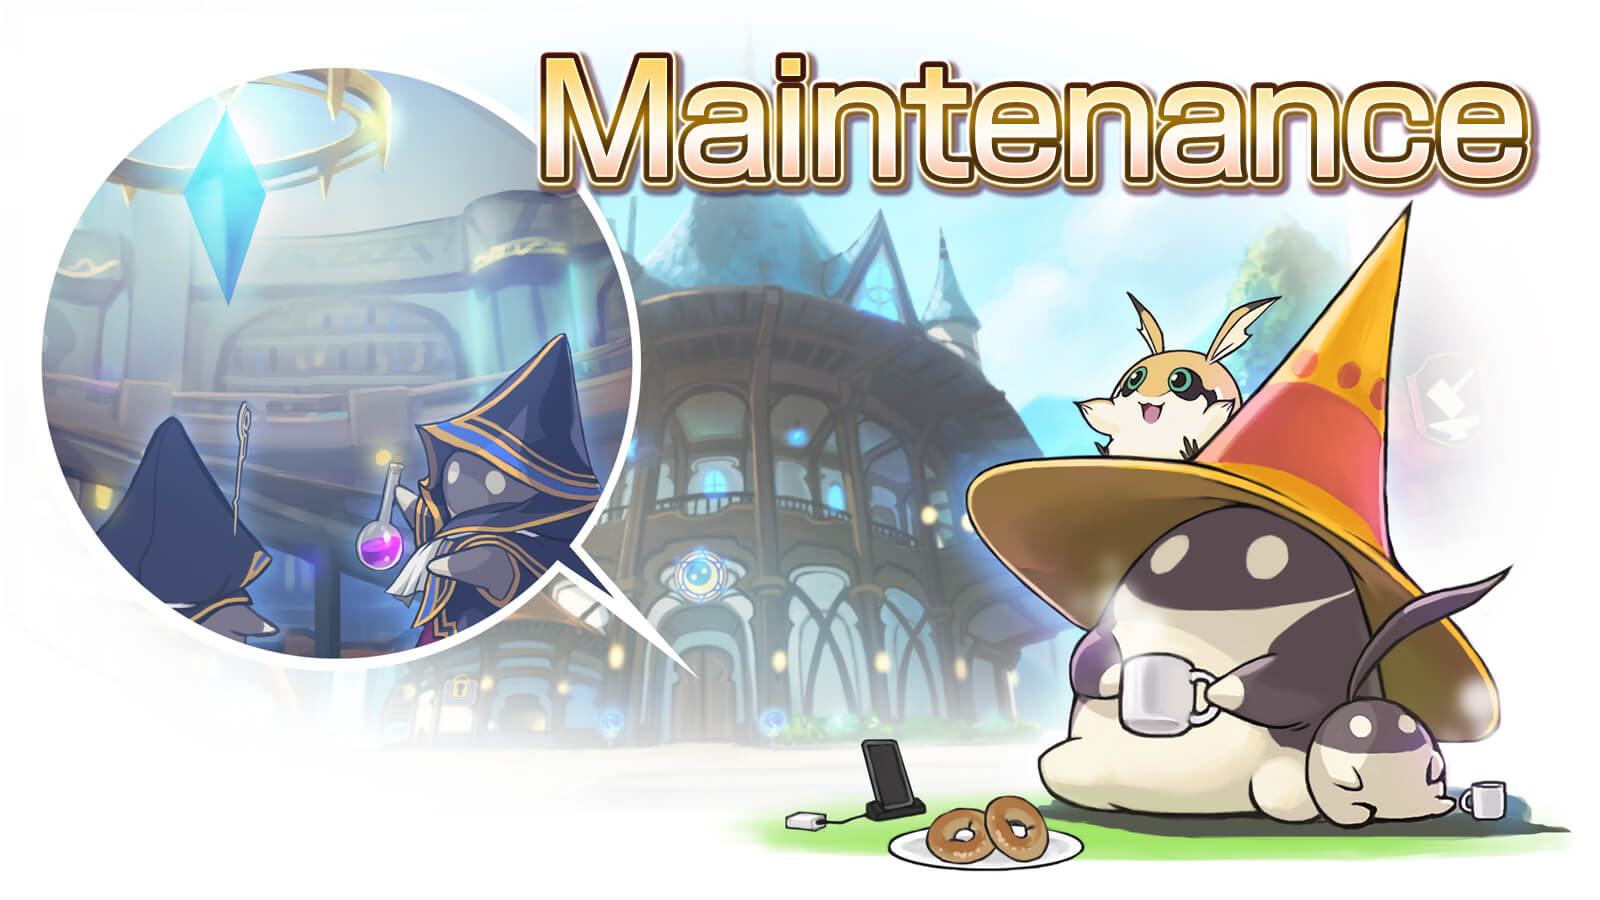 [Completed] Maintenance Notice: Feb 6, 14:00 - 18:00